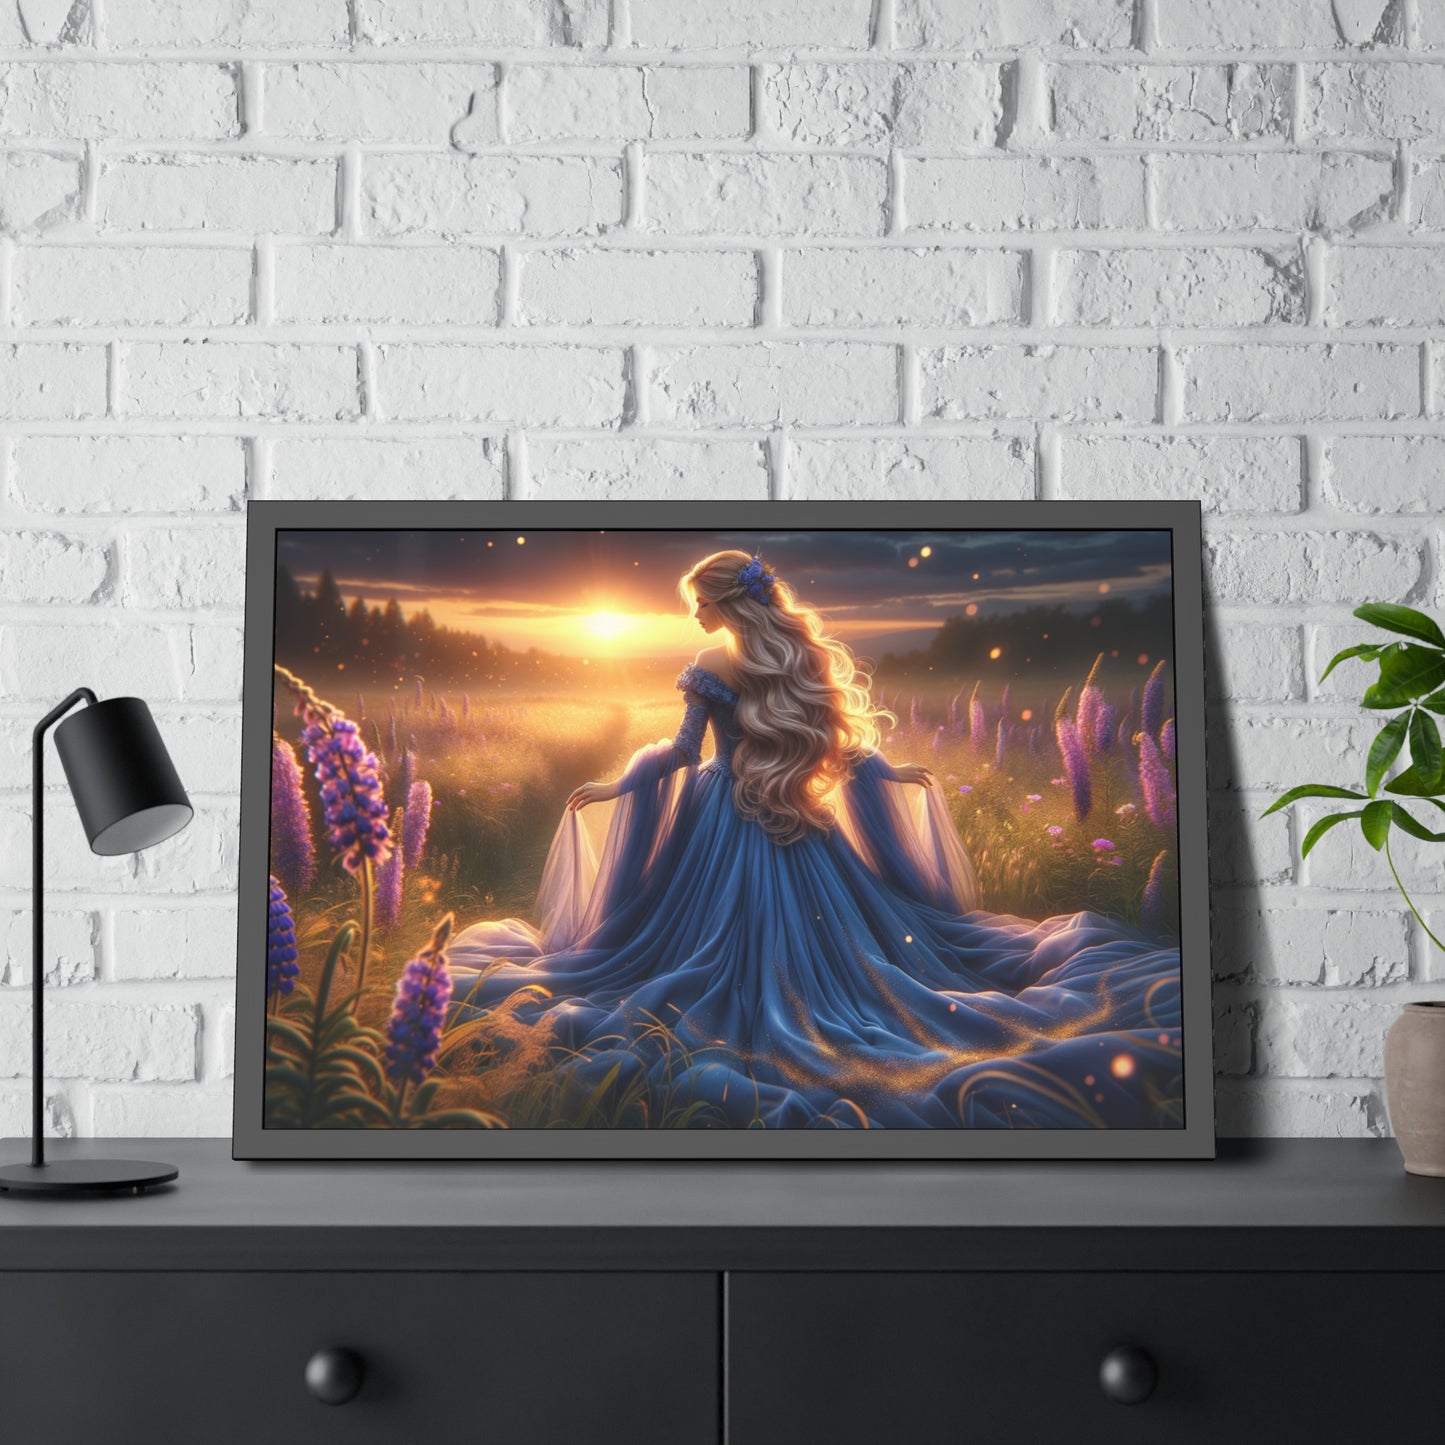 Once Upon A Fantasy - Blue Beauty Framed Posters